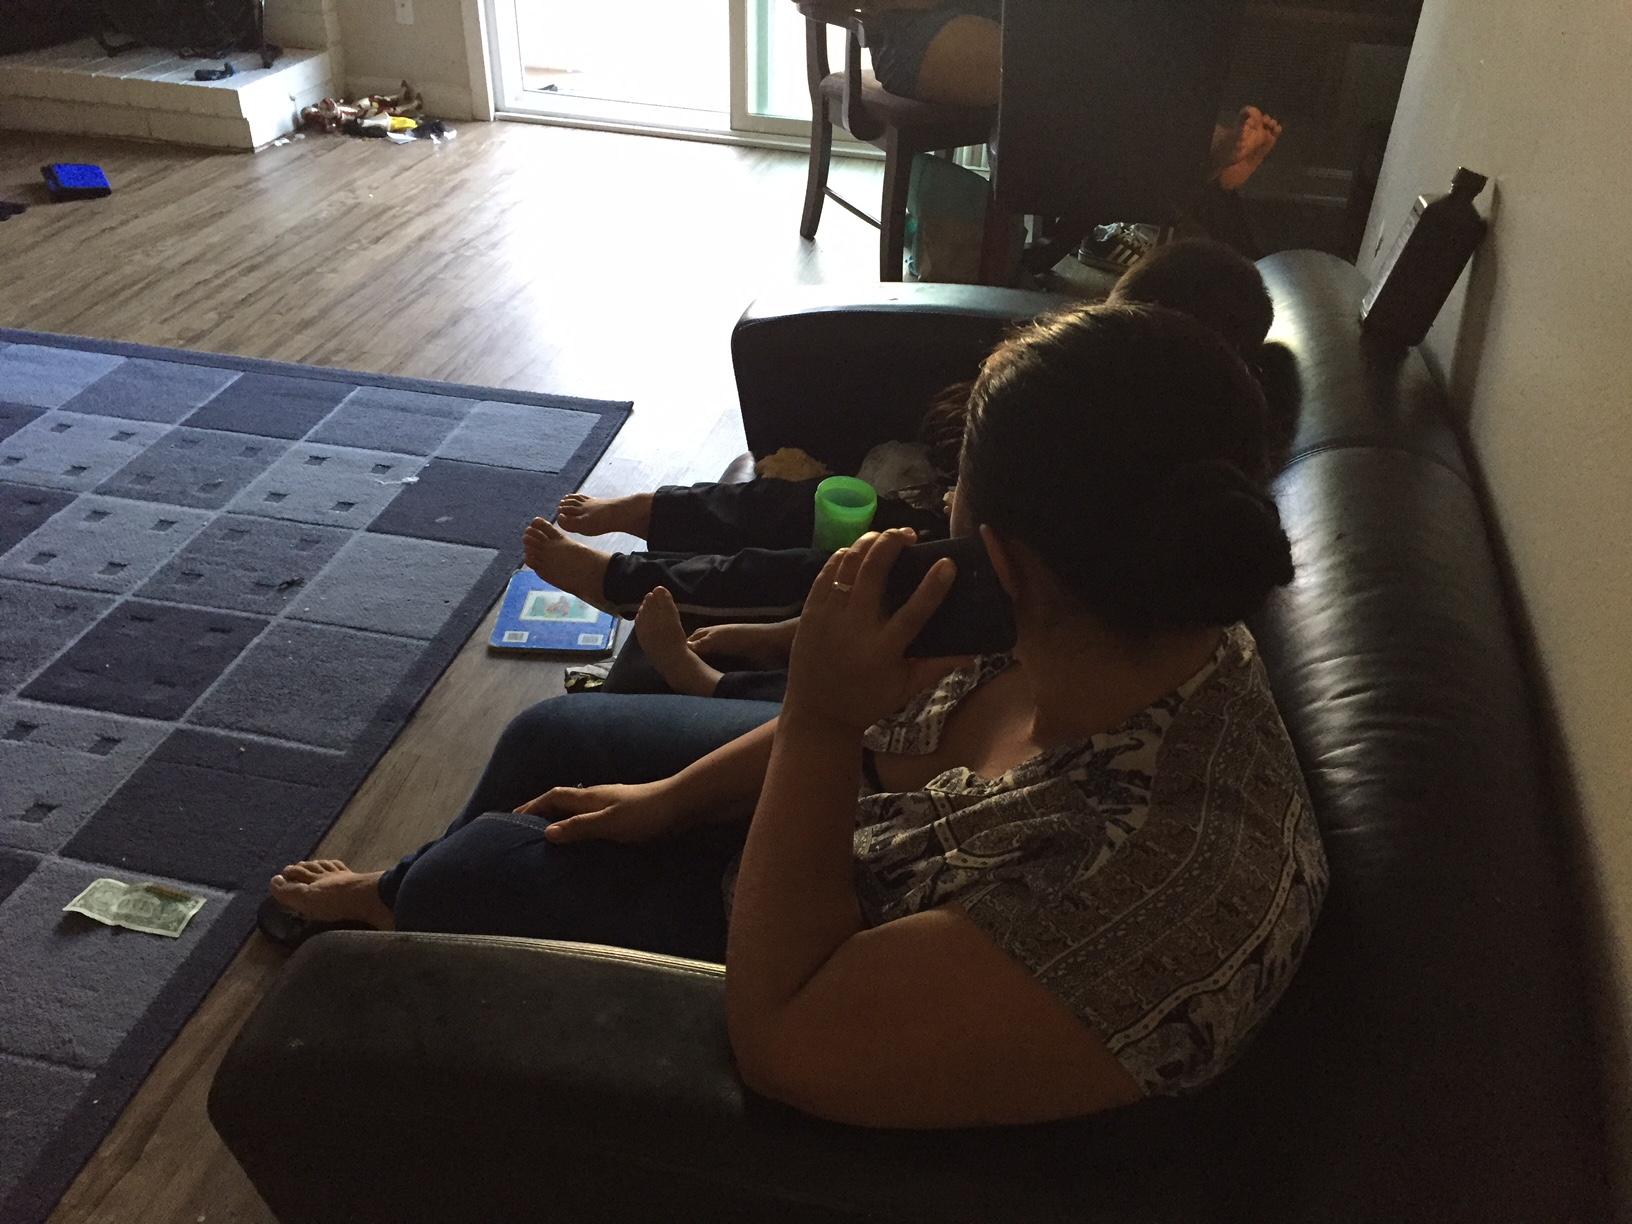 Woman on phone sitting on sofa, with kids next to her